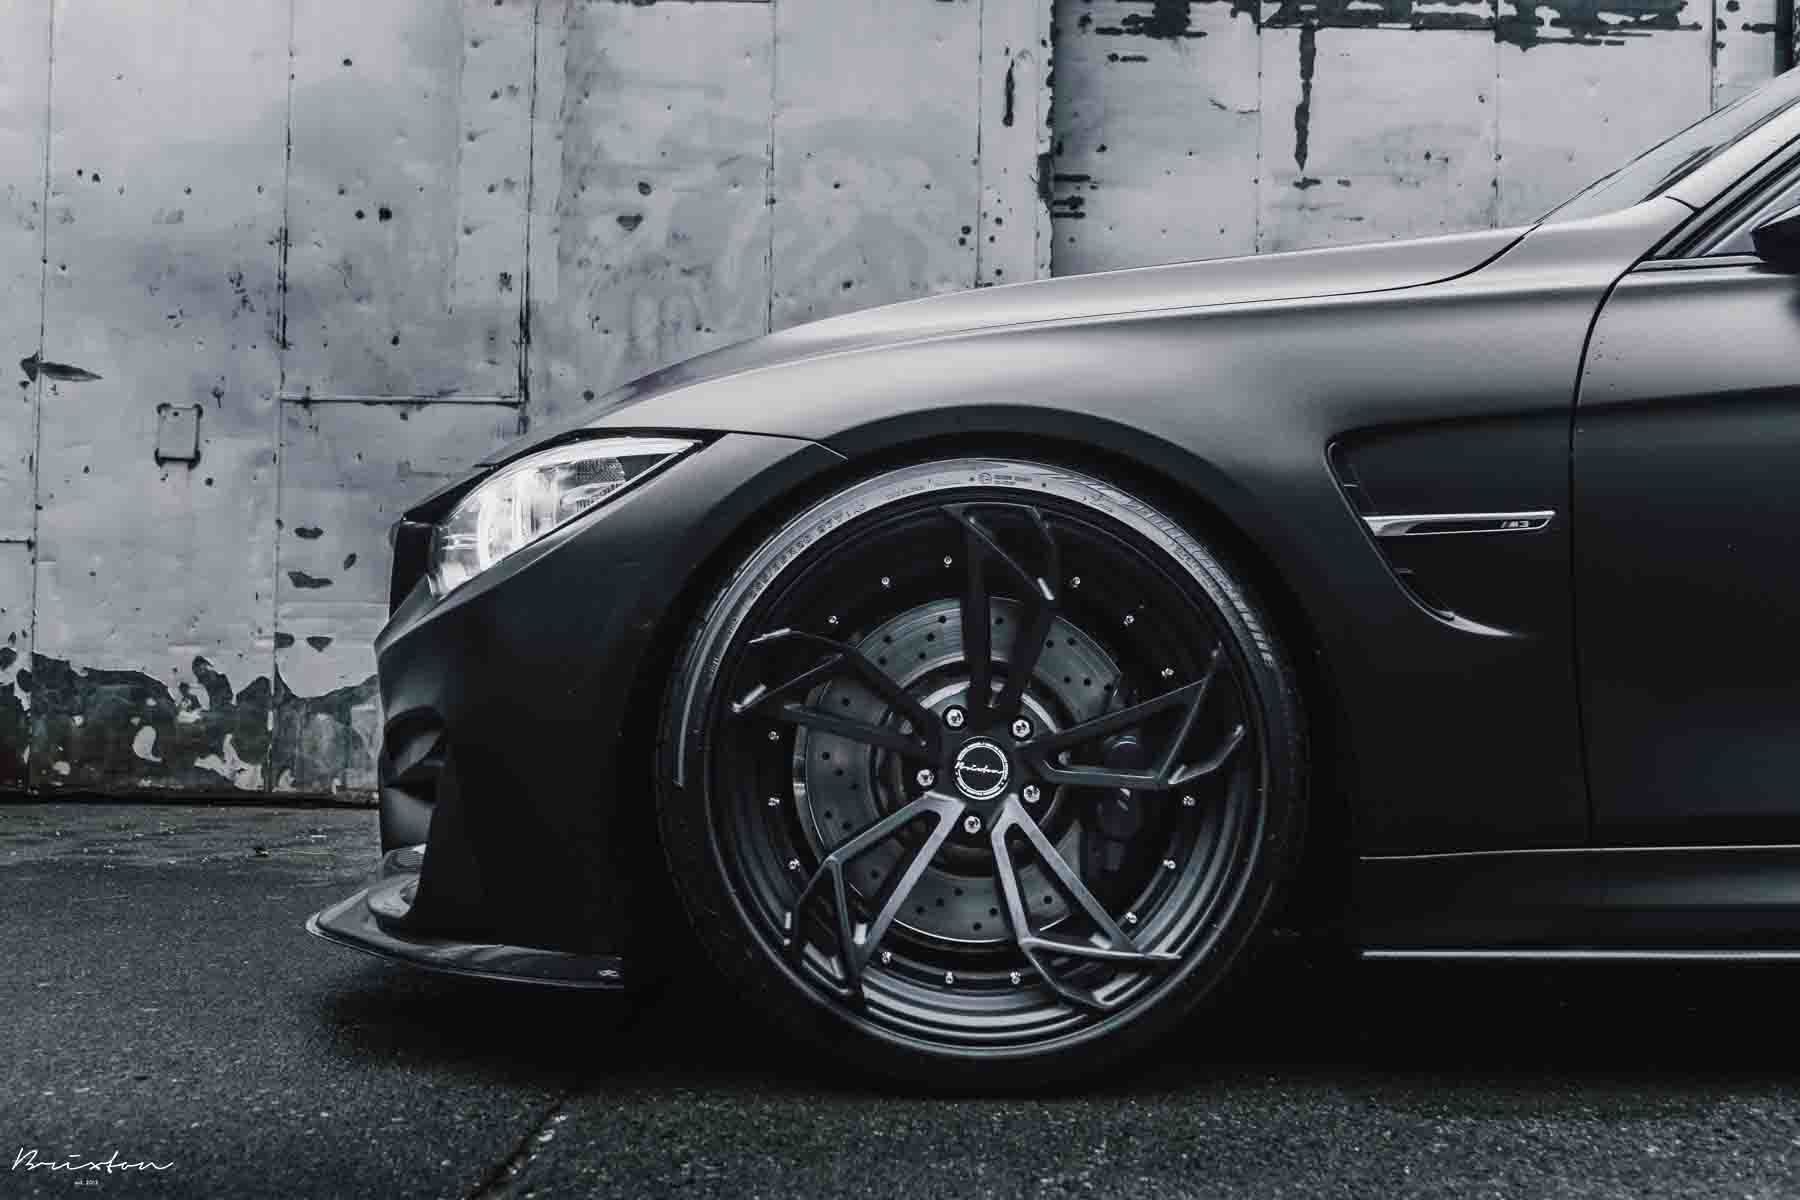 images-products-1-1934-232974222-brixton-forged-black-bmw-f80-m3-brixton-forged-pf1-duo-series-satin-black-concave-wheels-3.jpg